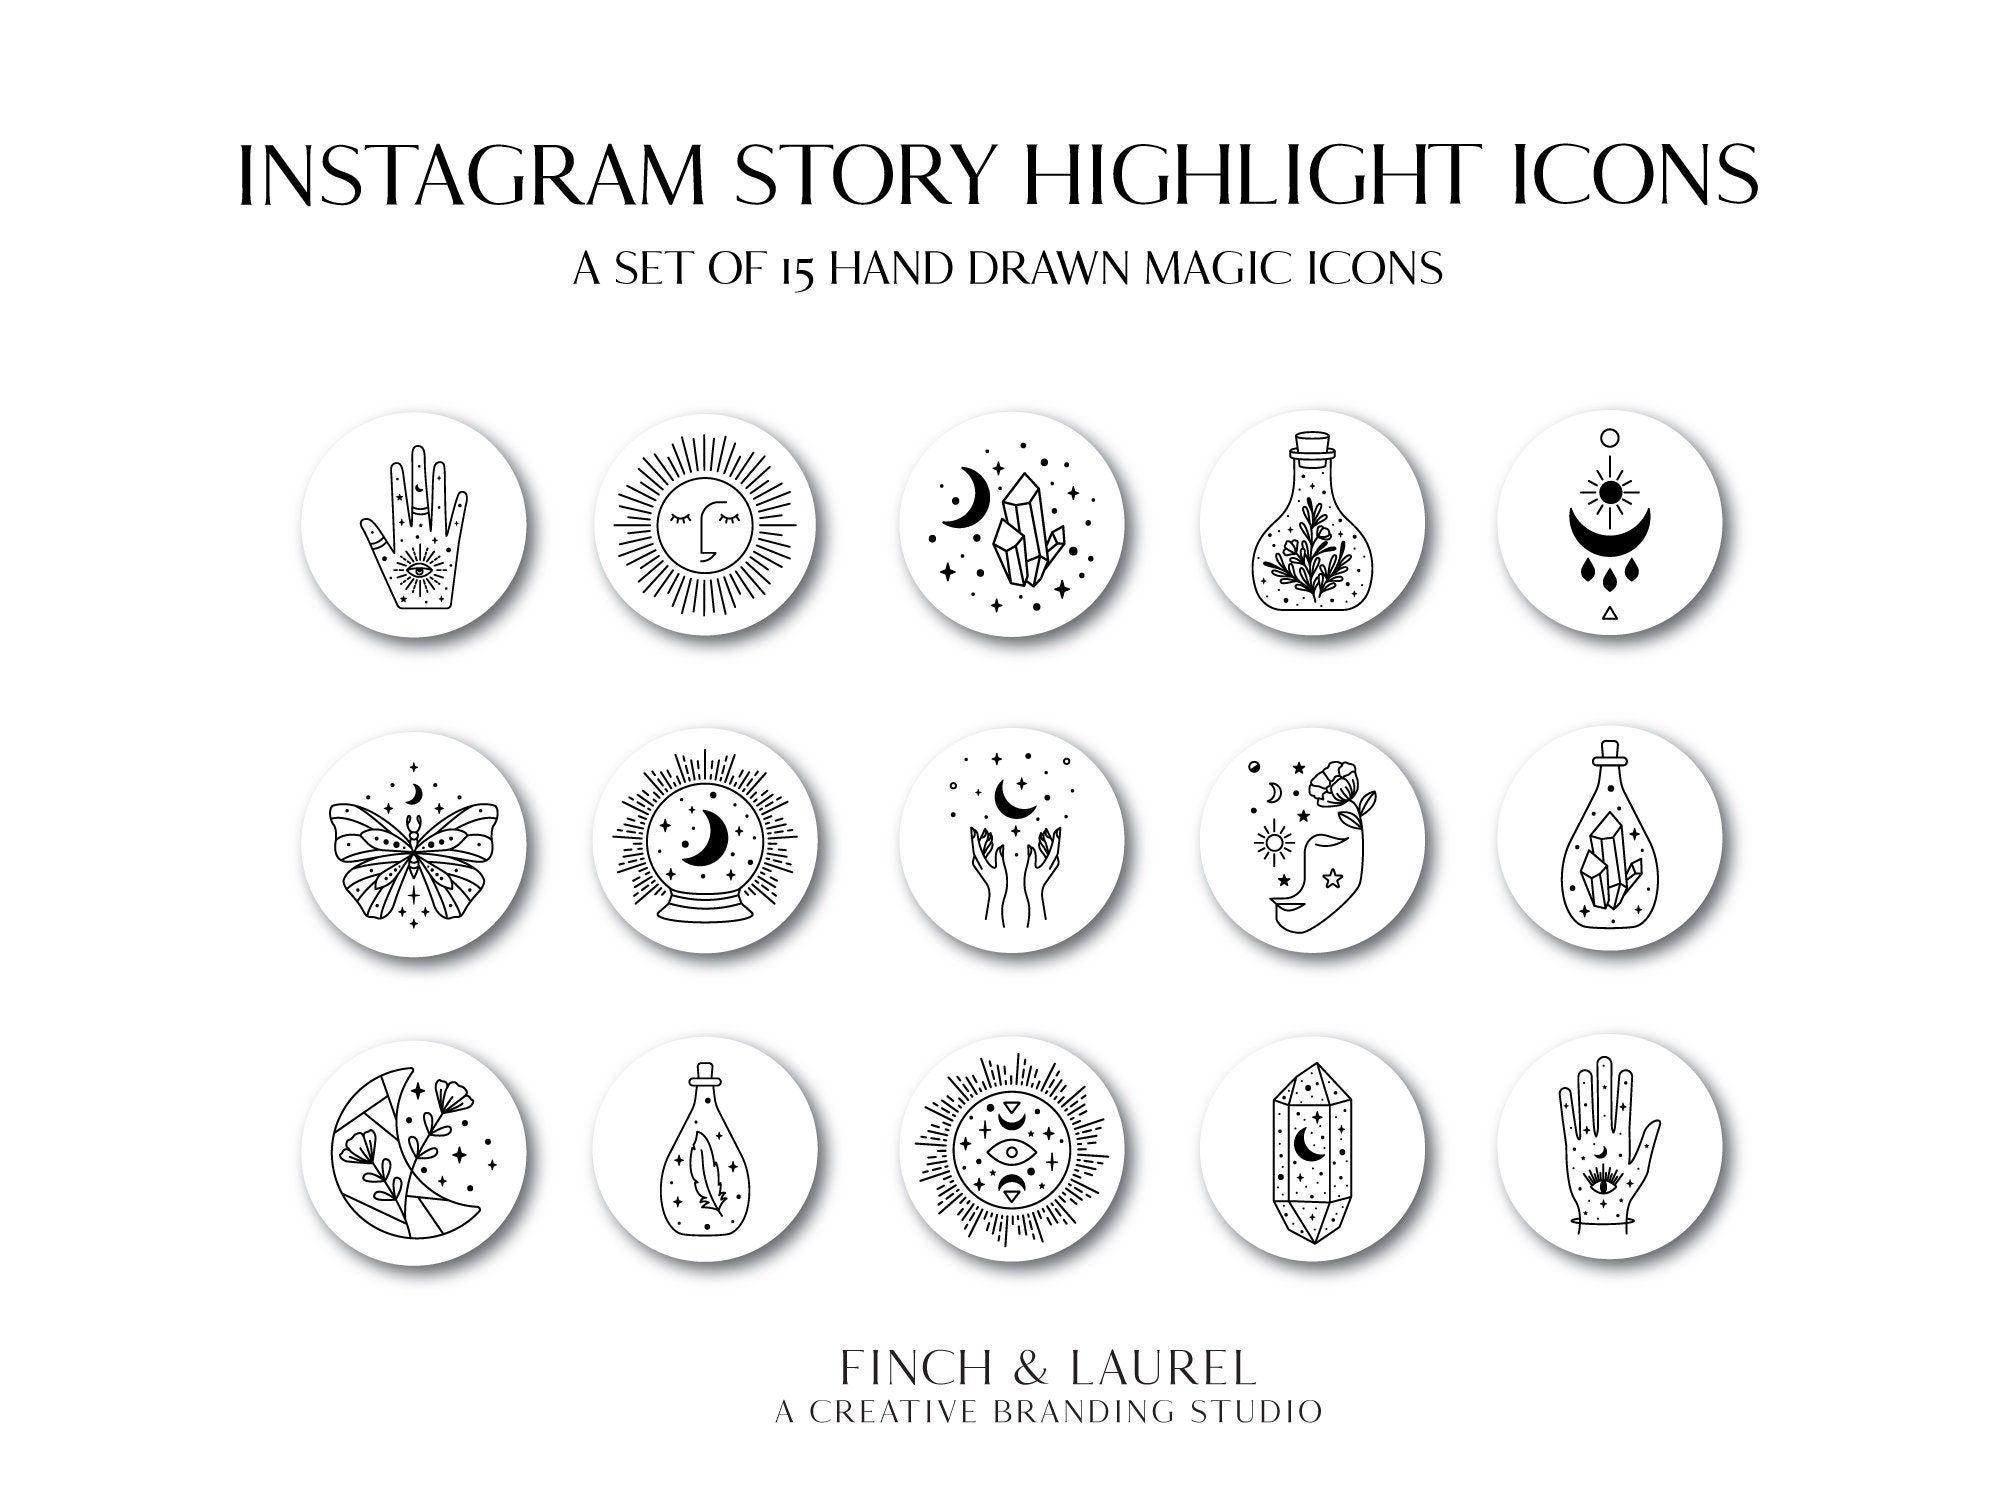 Instagram story highlight icons hand drawn icons magic | Etsy